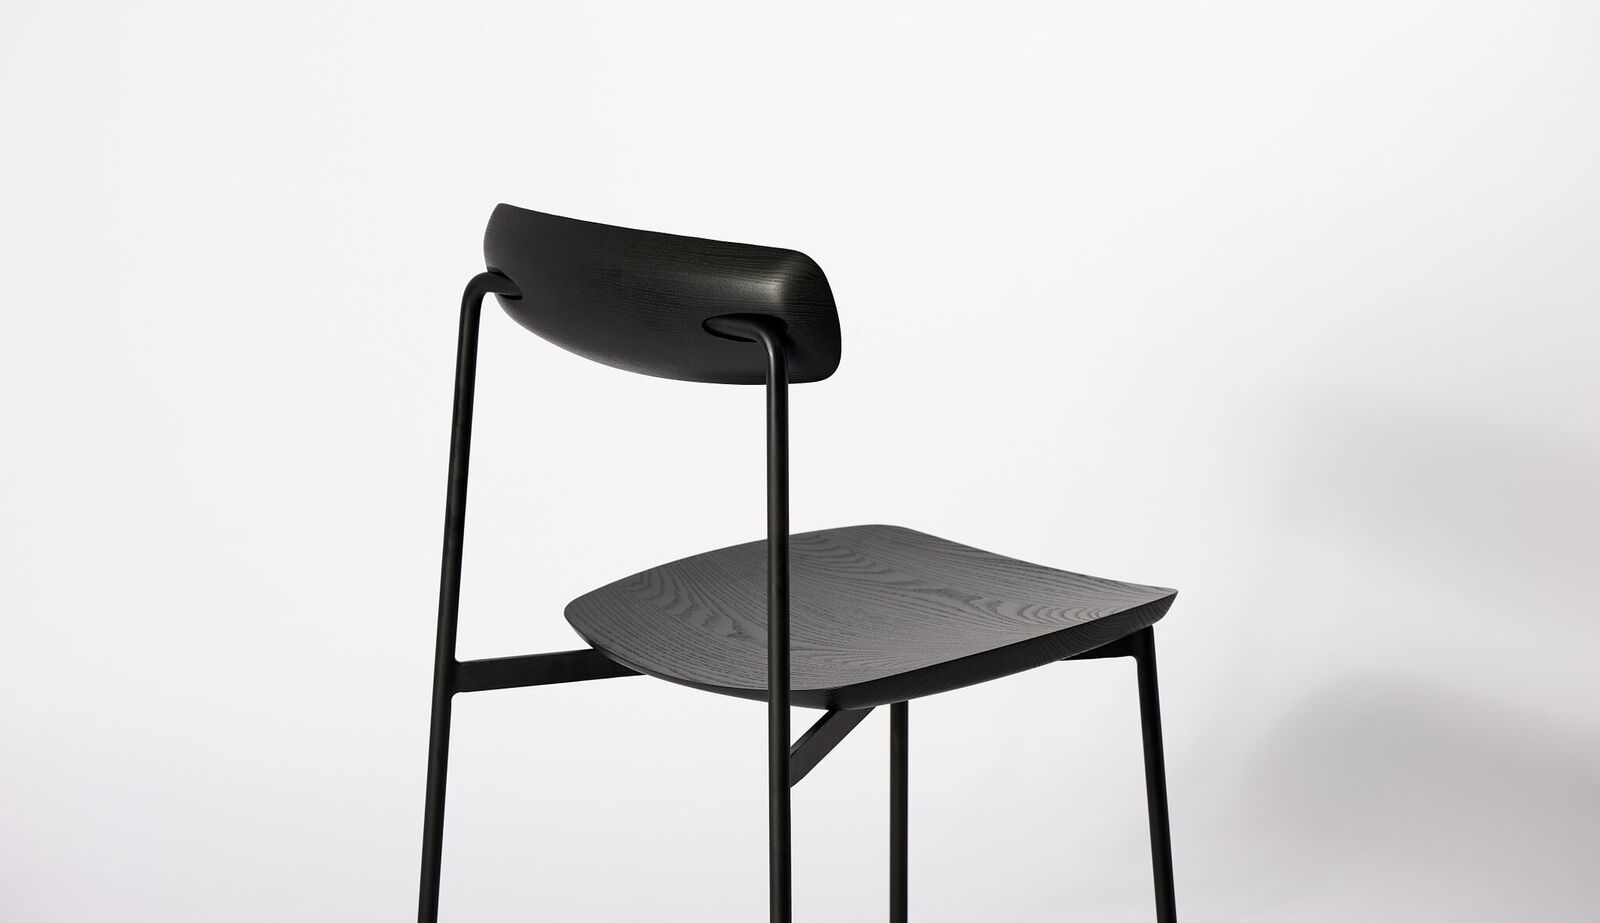 SIA chair by Cult. Stainless Steel frame manufactured by Ogis.